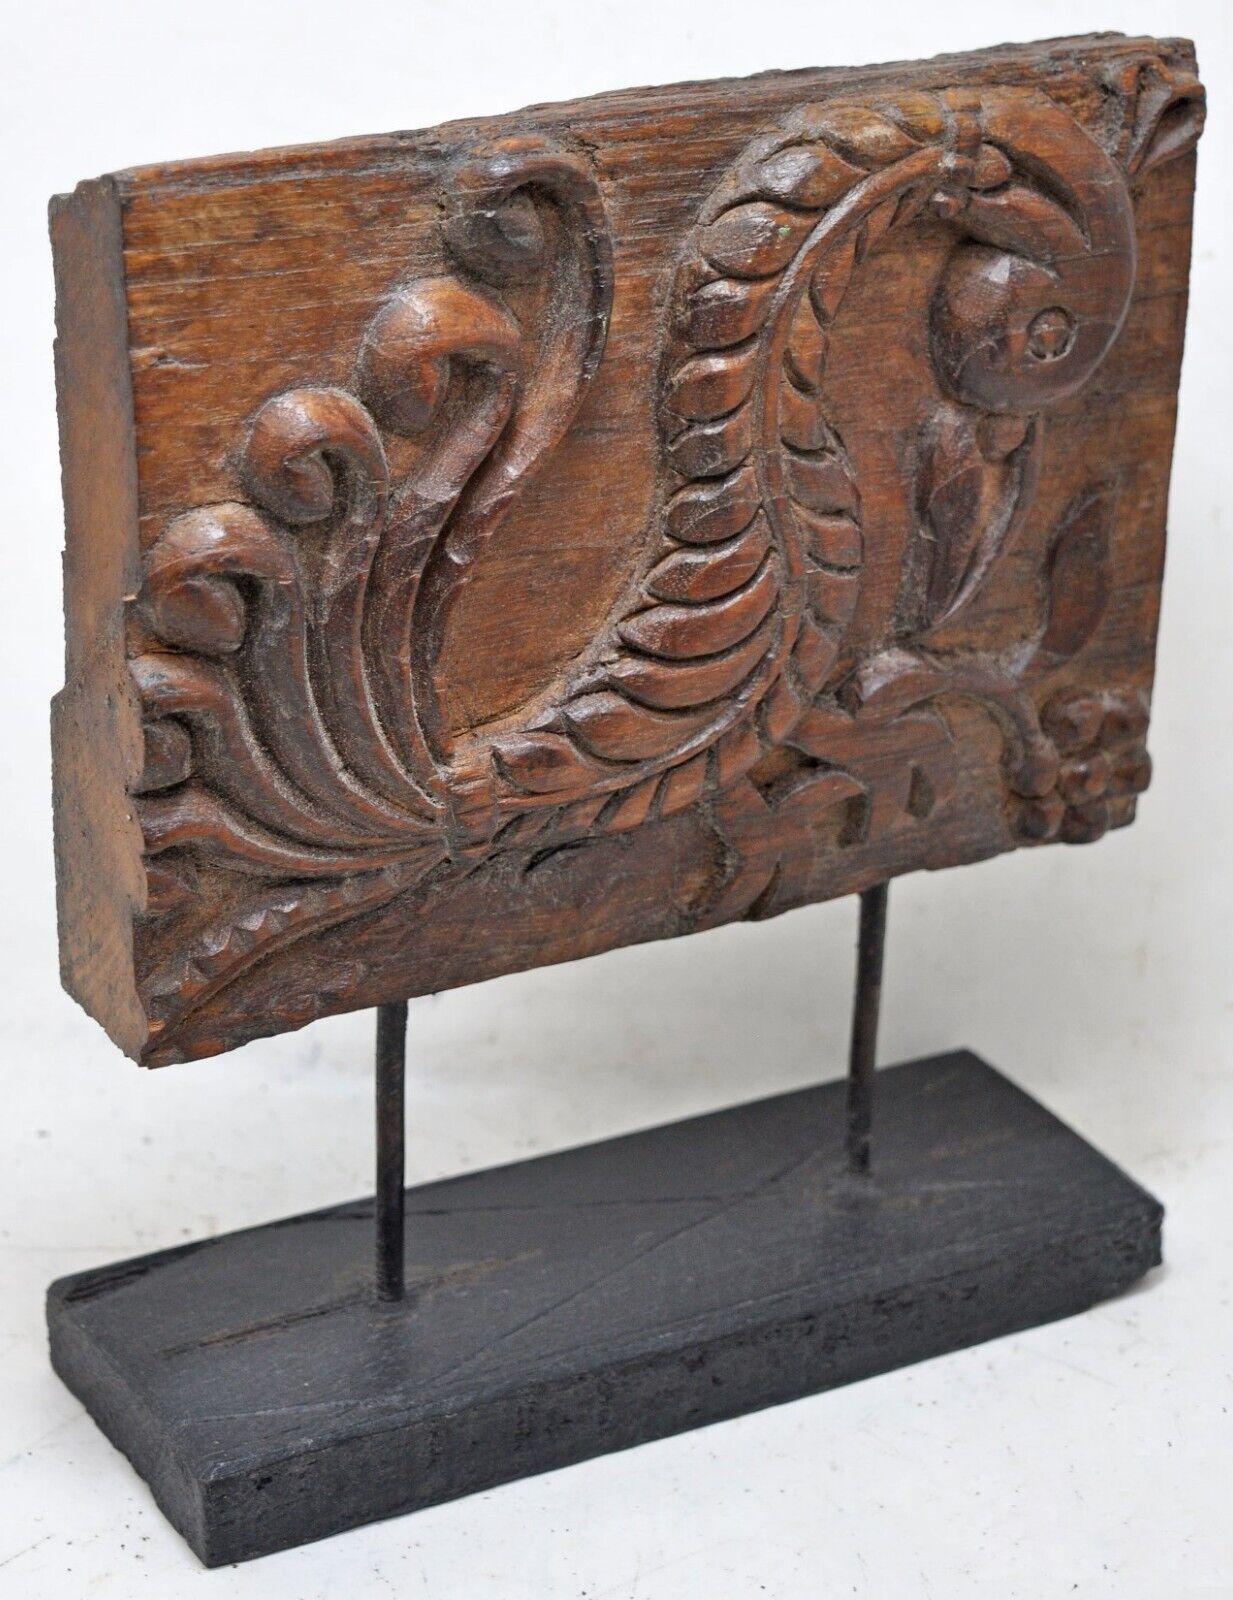 Original Vintage Hand-Carved Relief Panel Fragment depicting a Bird

Anonymous
Southern Asia, probably India; first-half of the 20th century
Wood

Approximate size: 7.8 x 2.6 x 9.2 in.

The present carving in high-relief depicts an abstract bird in